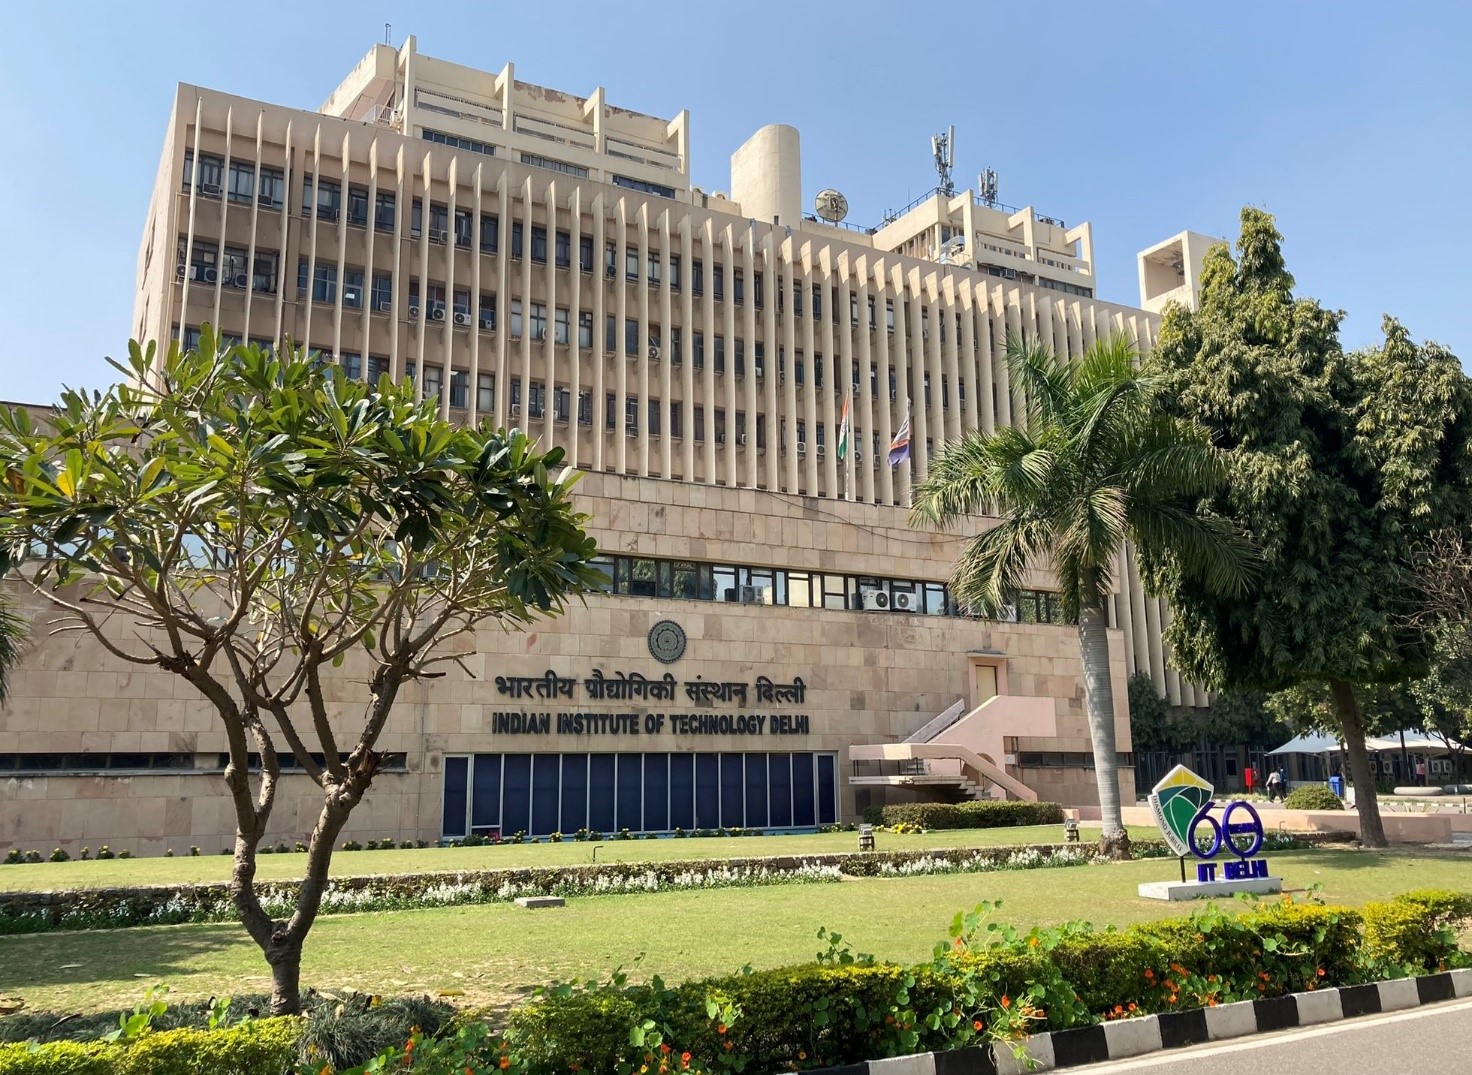 ITC Inks Pact with IIT Delhi to Carry Out Collaborative Research in STEM Areas : IIT Delhi